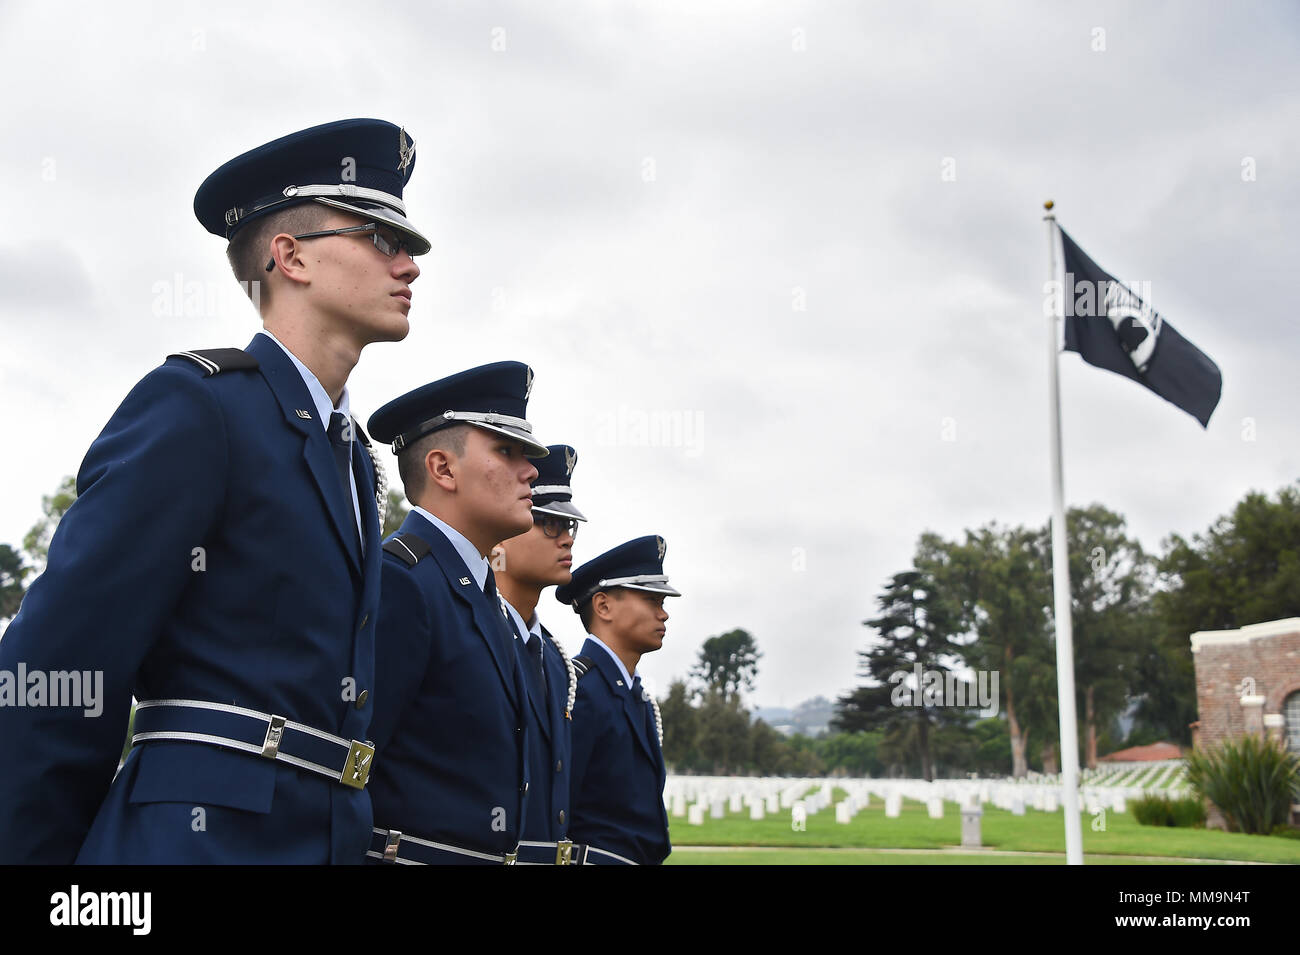 UCLA AFROTC Det 55 cadets stand by for the start of the French Legion of  Honor Medal ceremony. BGen Philip Garrant, Vice Commander, Space and  Missile Systems Center, attended and spoke at